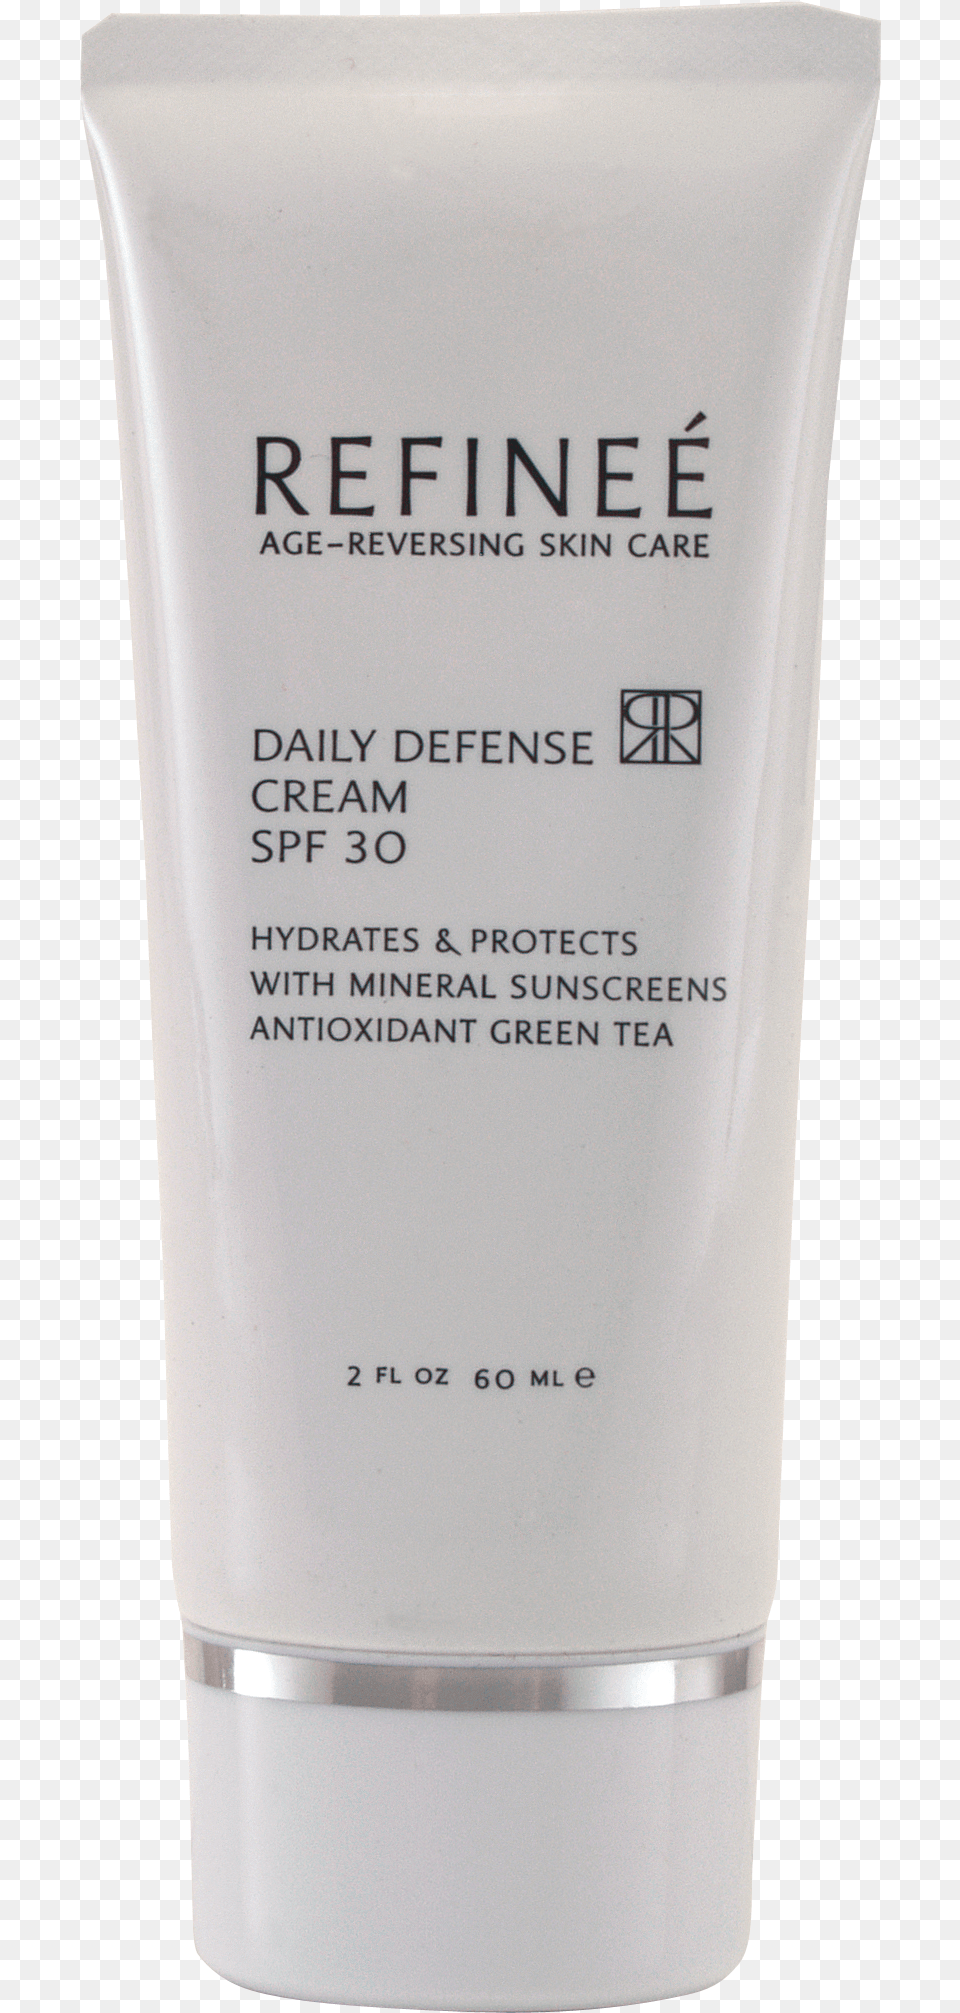 Defense Cream Bottle Refinee Exfoliating Fruit Cleanser, Lotion, Aftershave, Cosmetics Png